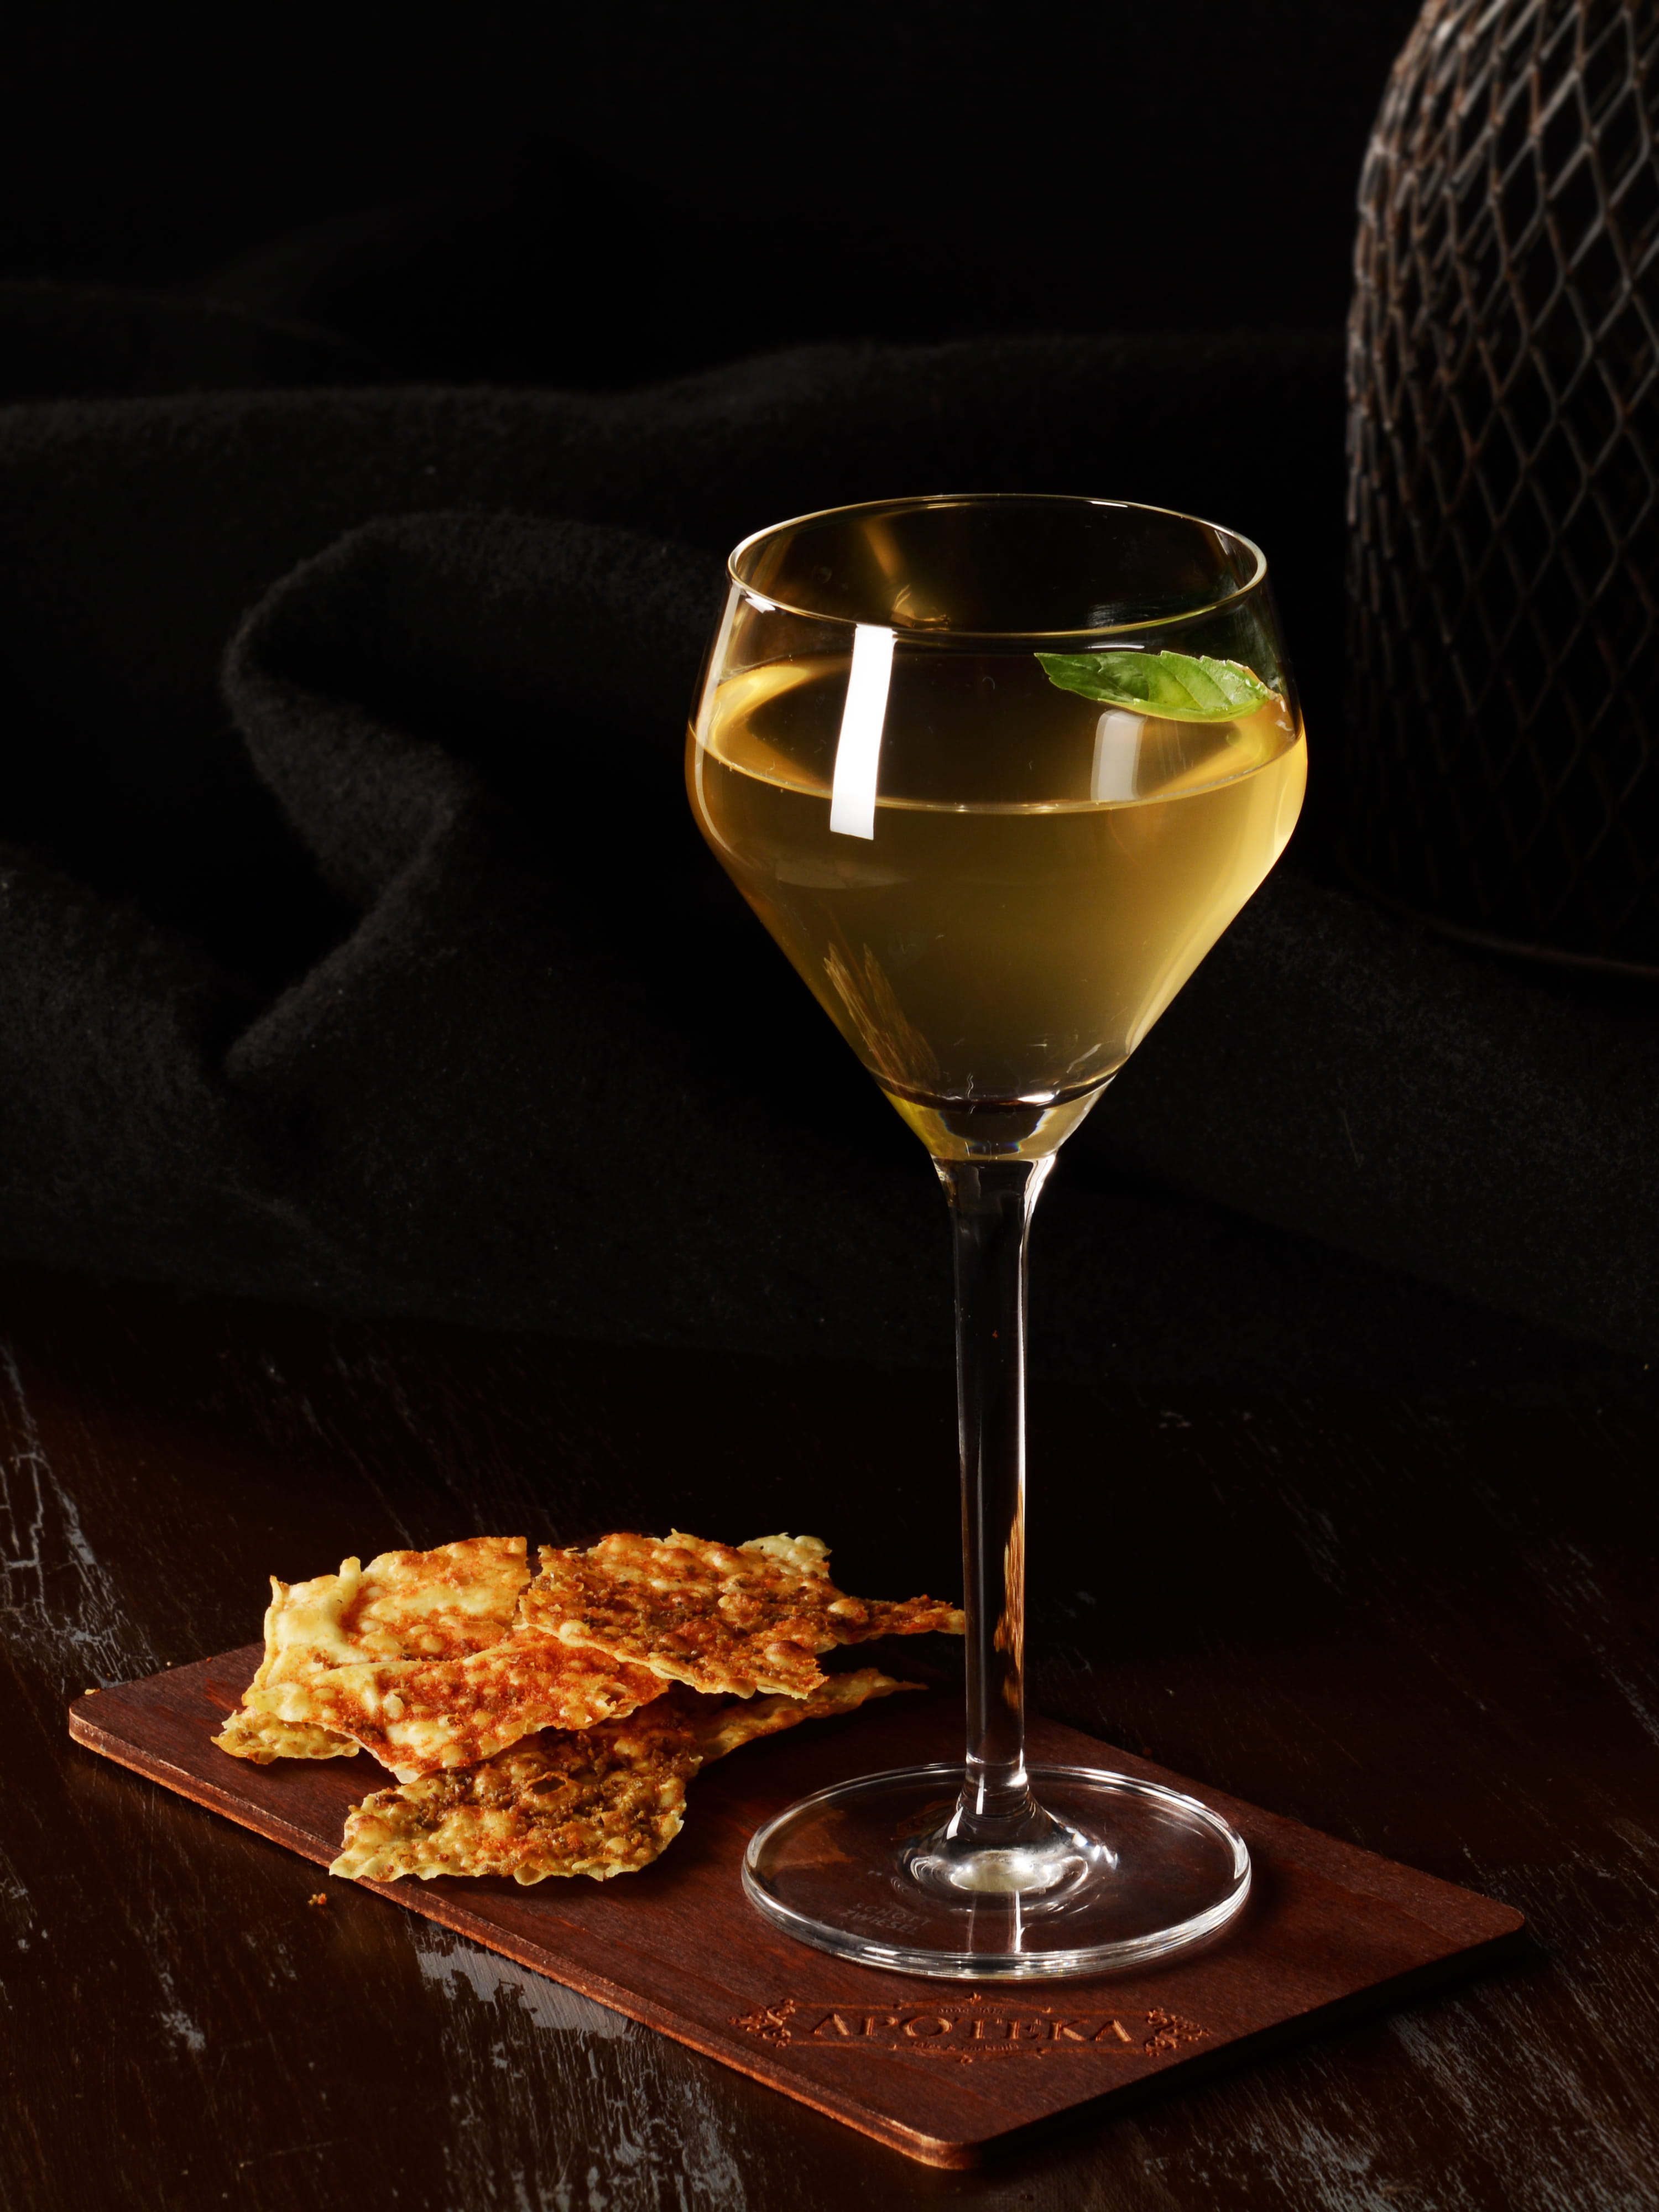 Wonderful cocktail accompanied by Italian snacks, directly inspired by the Mediterranean cuisine.